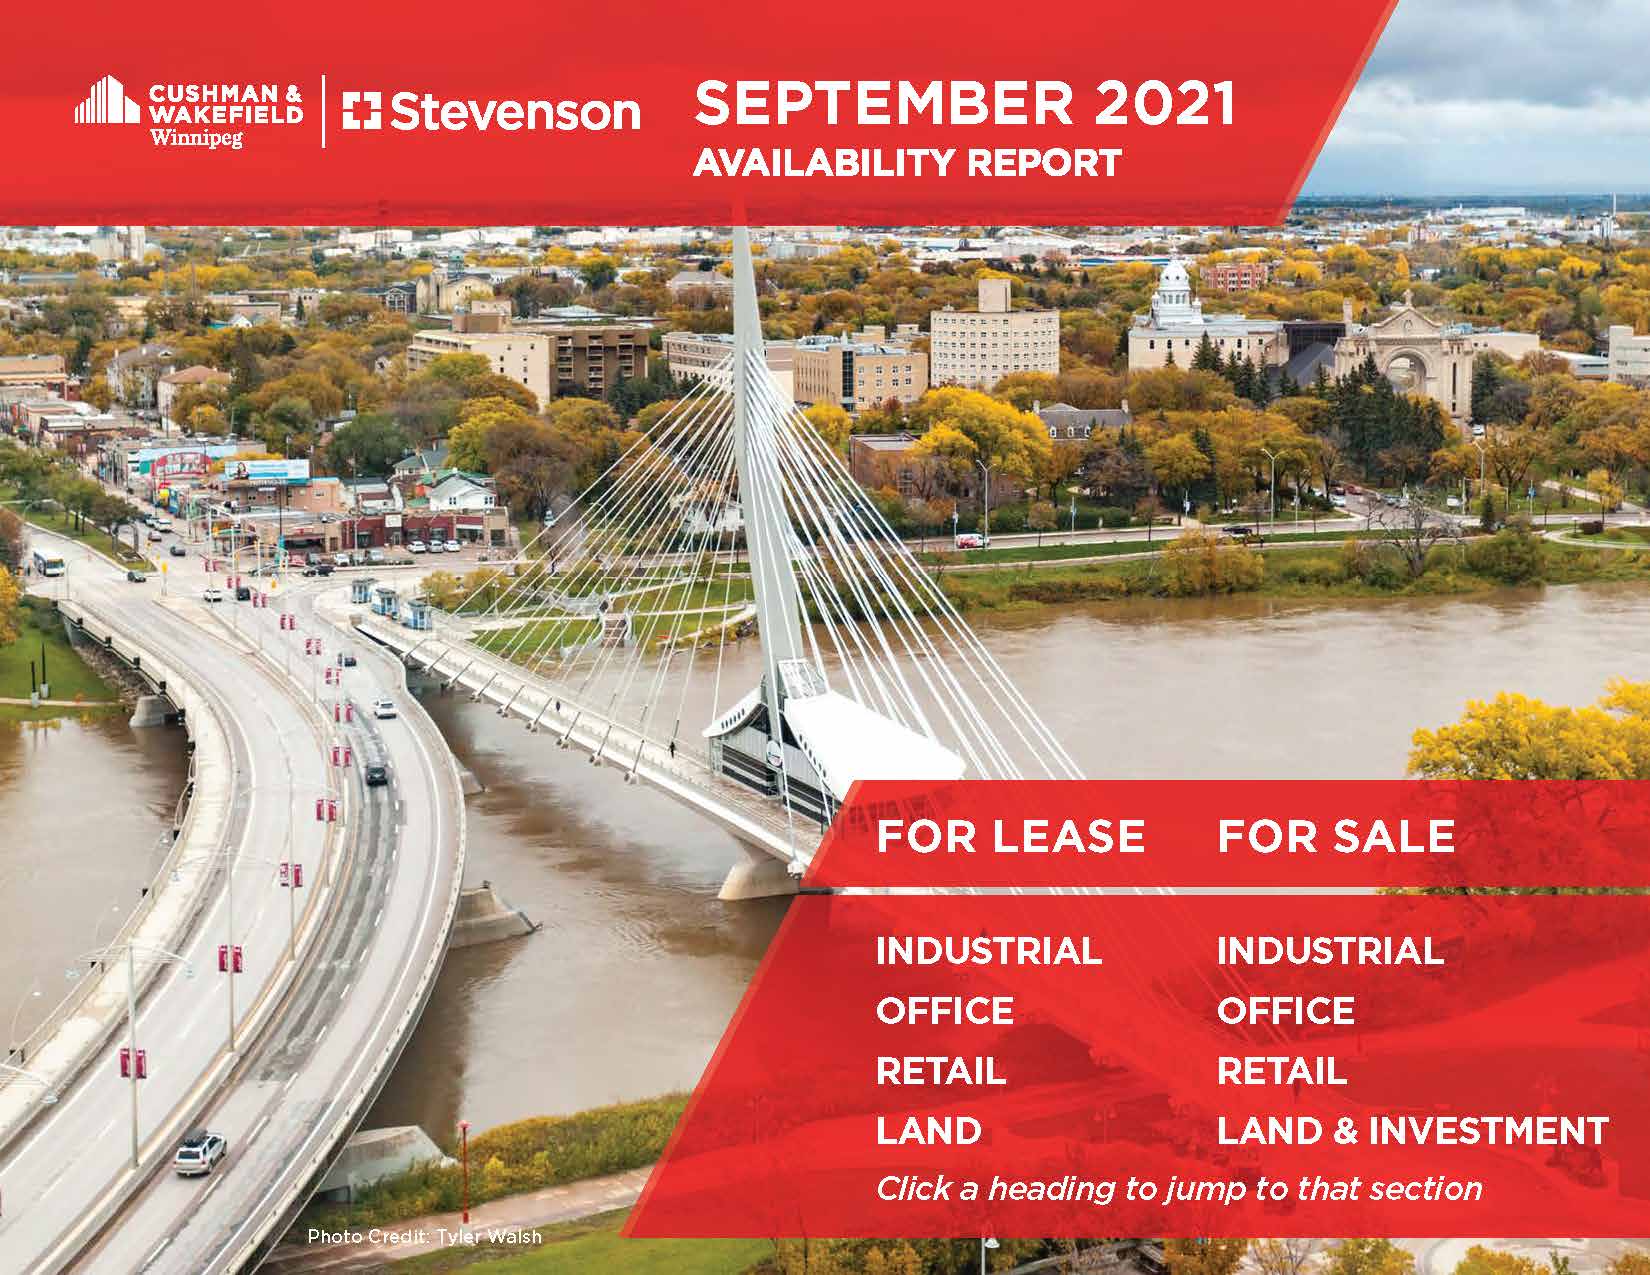 2021 property availability report CWStevenson january 2022 availability report of properties industrial office retail land investments